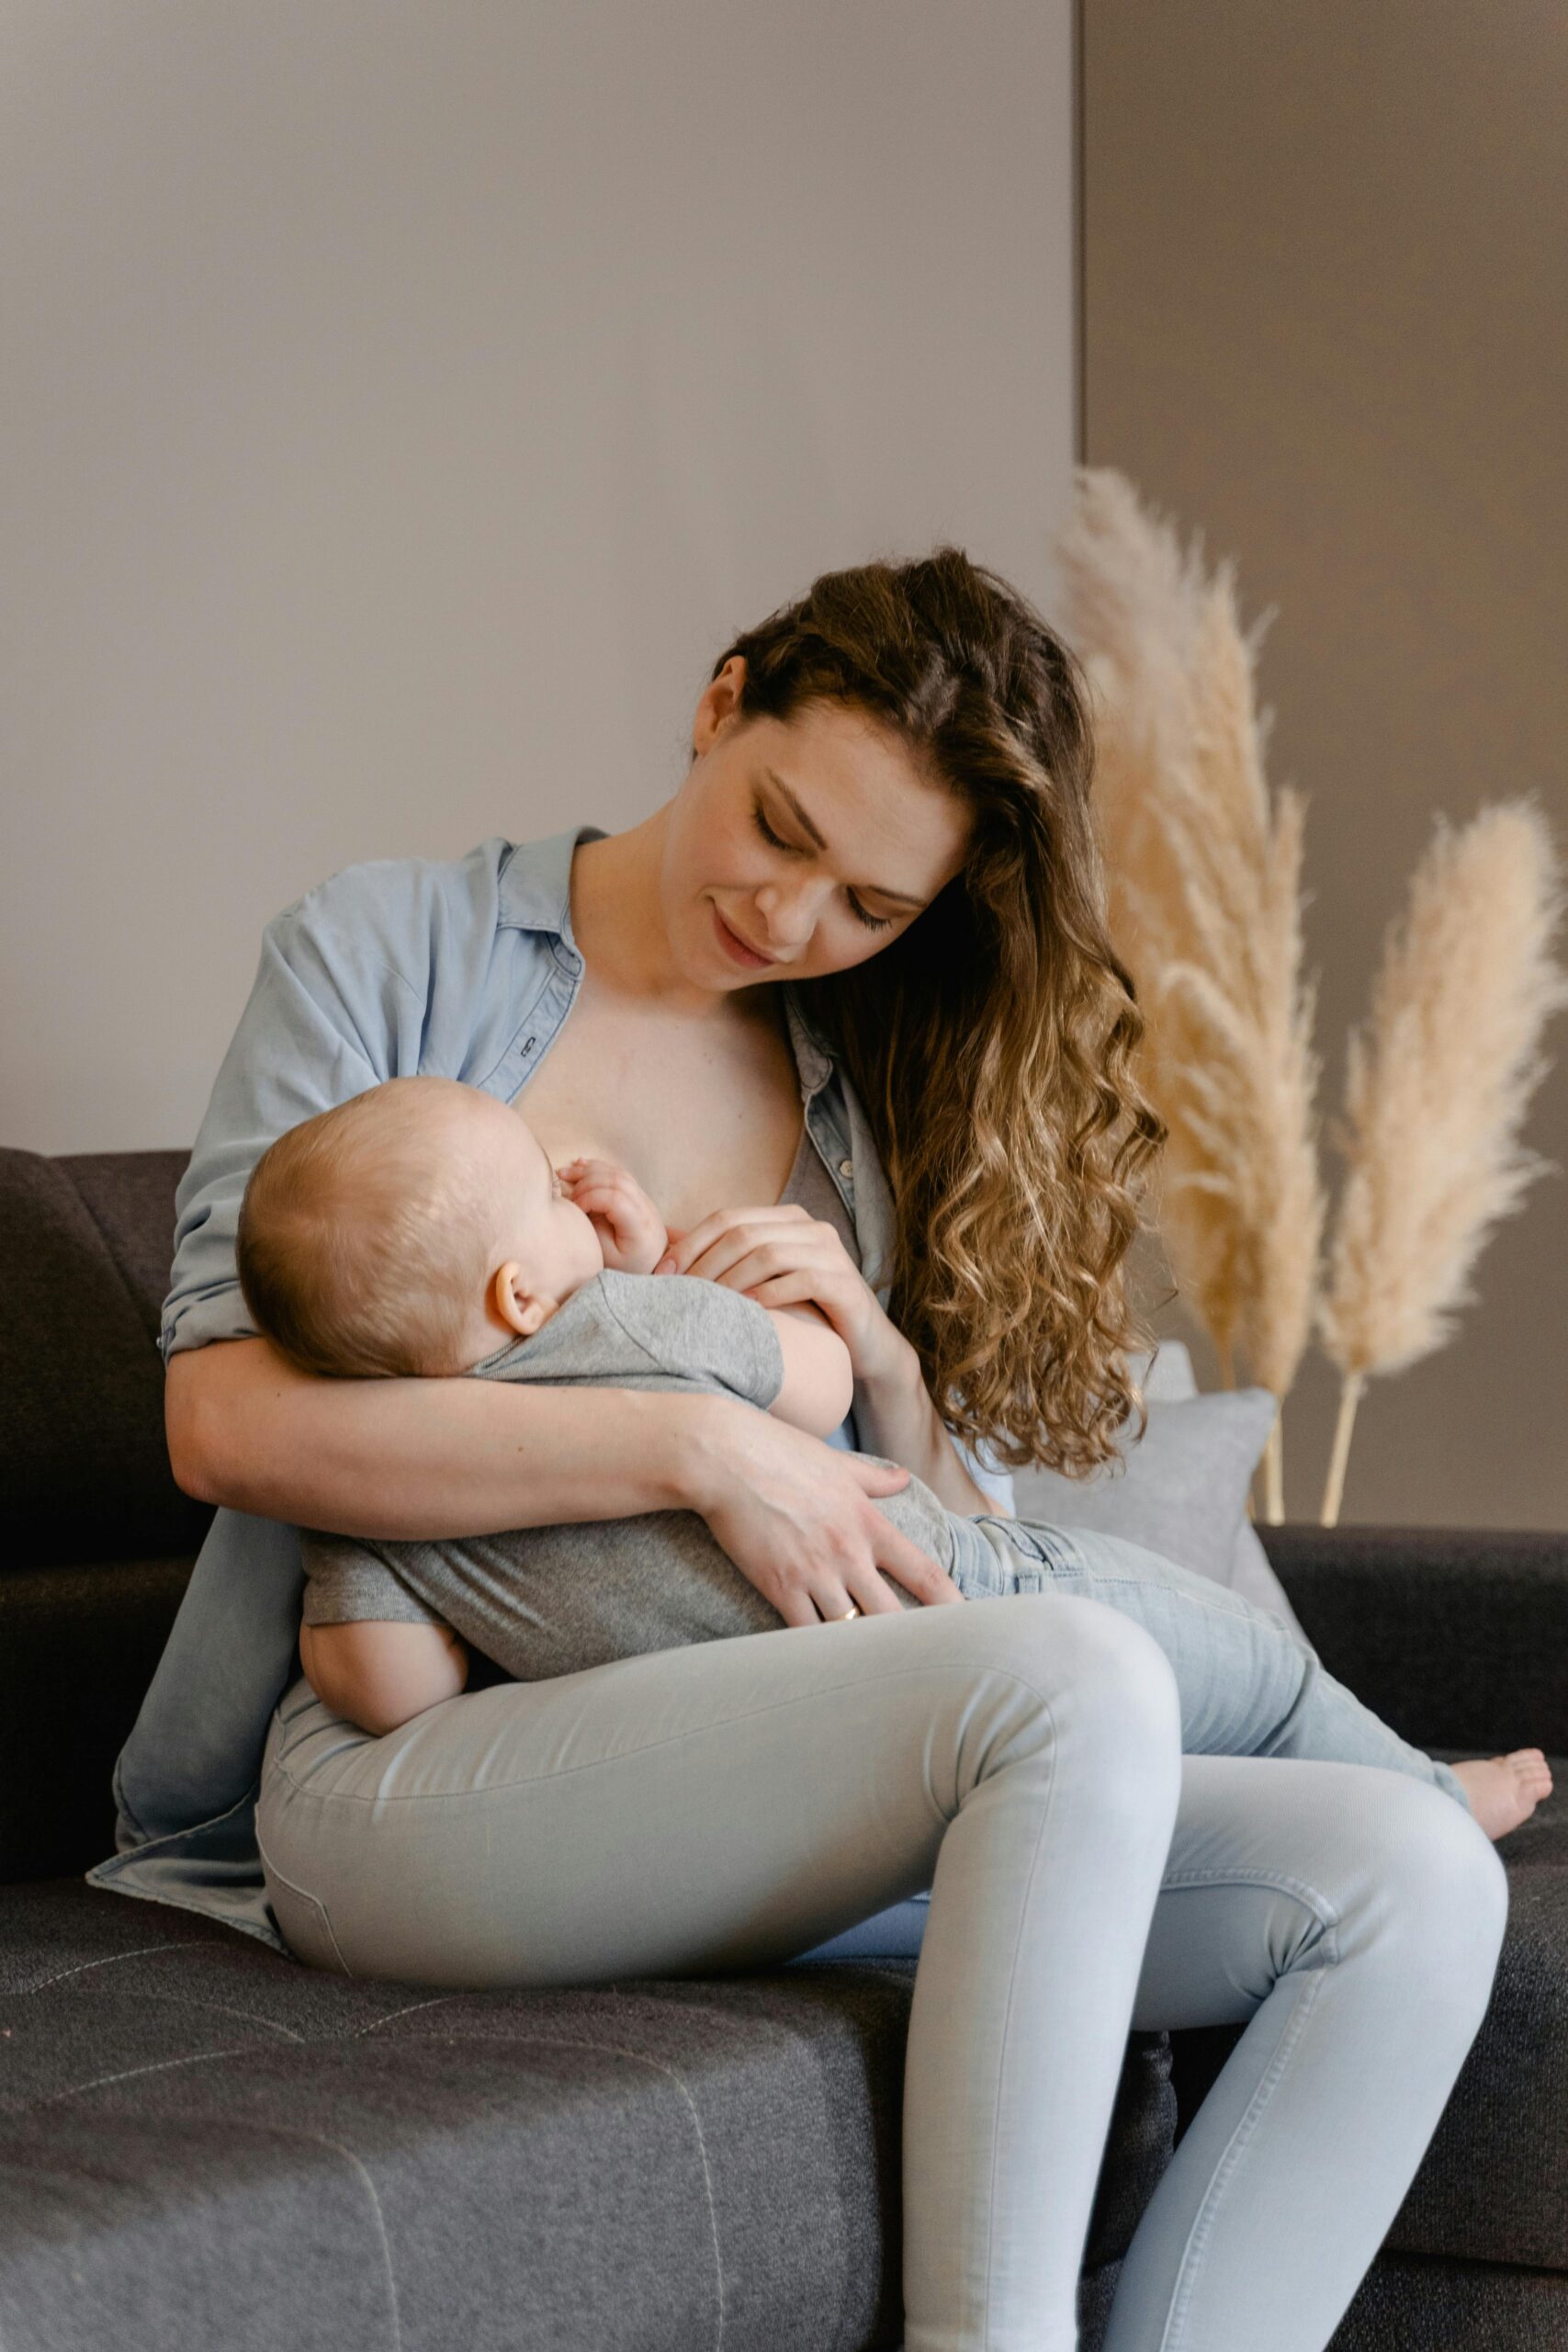 Weaning when and how to end breastfeeding